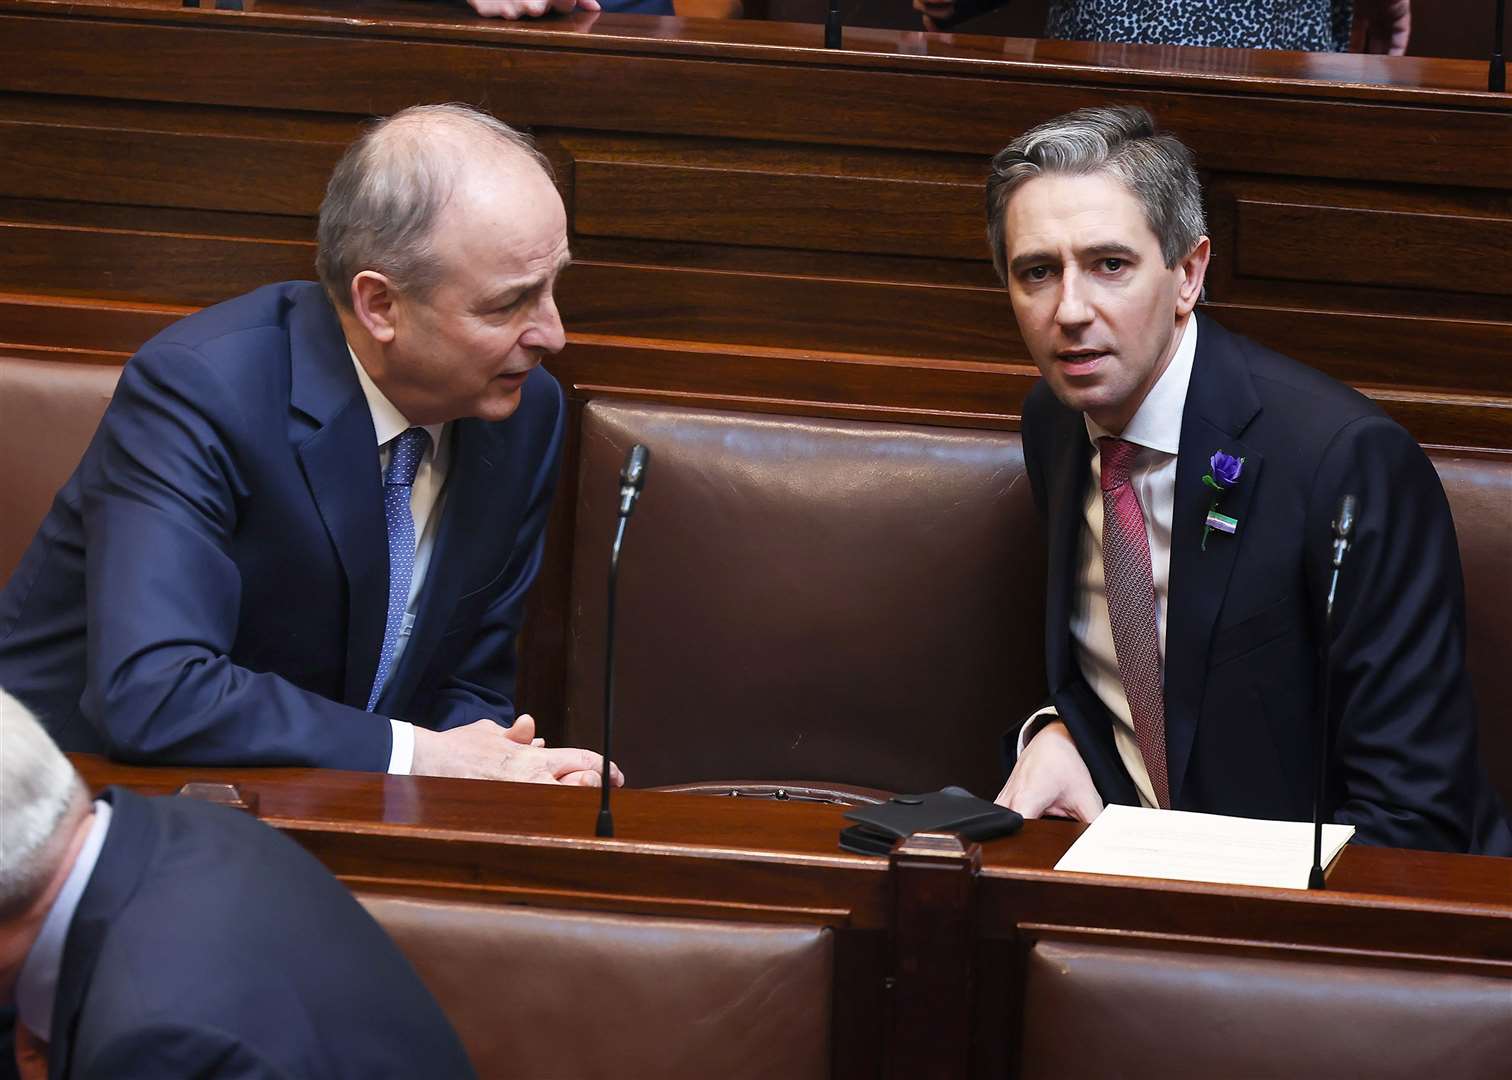 Tanaiste Micheal Martin was speaking shortly after a Cabinet reshuffle by the new Taoiseach Simon Harris (Maxwell Photography/PA)